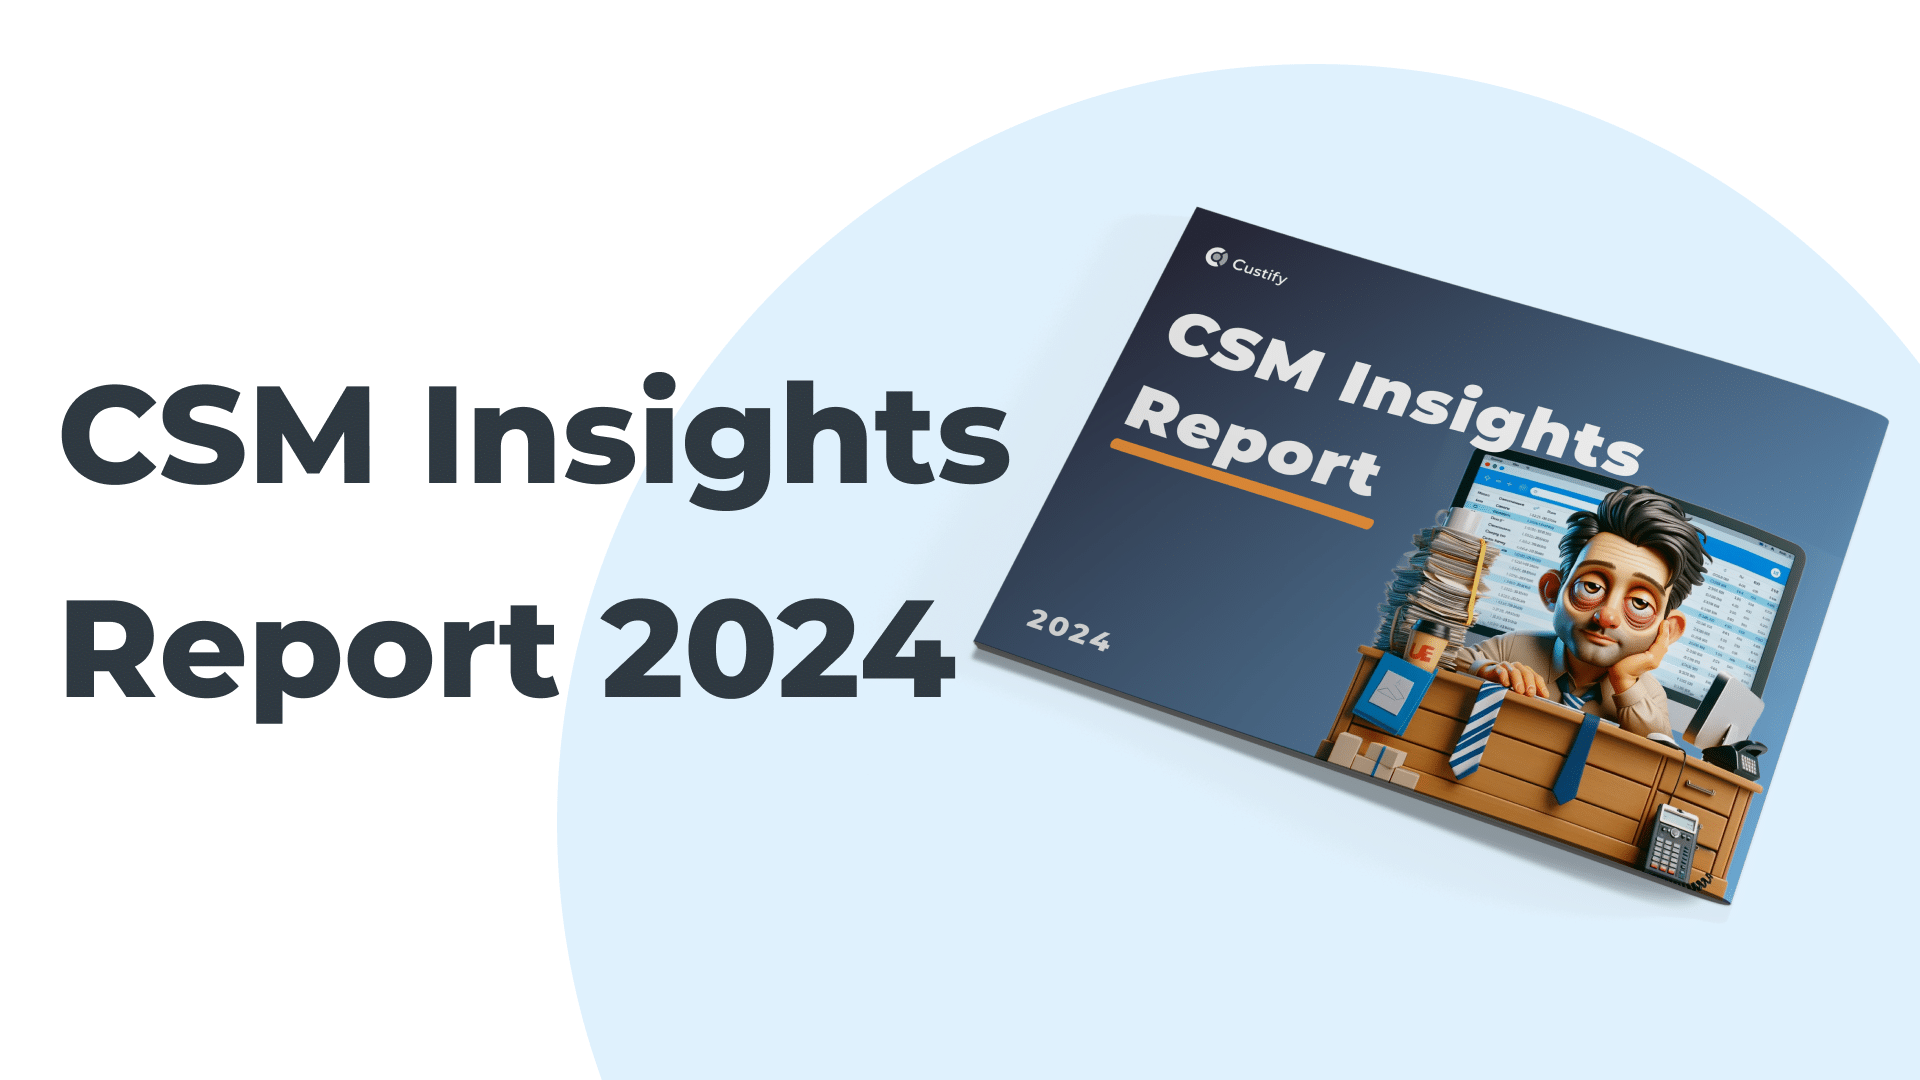 Customer Success Uncovered 2024 (CSM Insights Report)